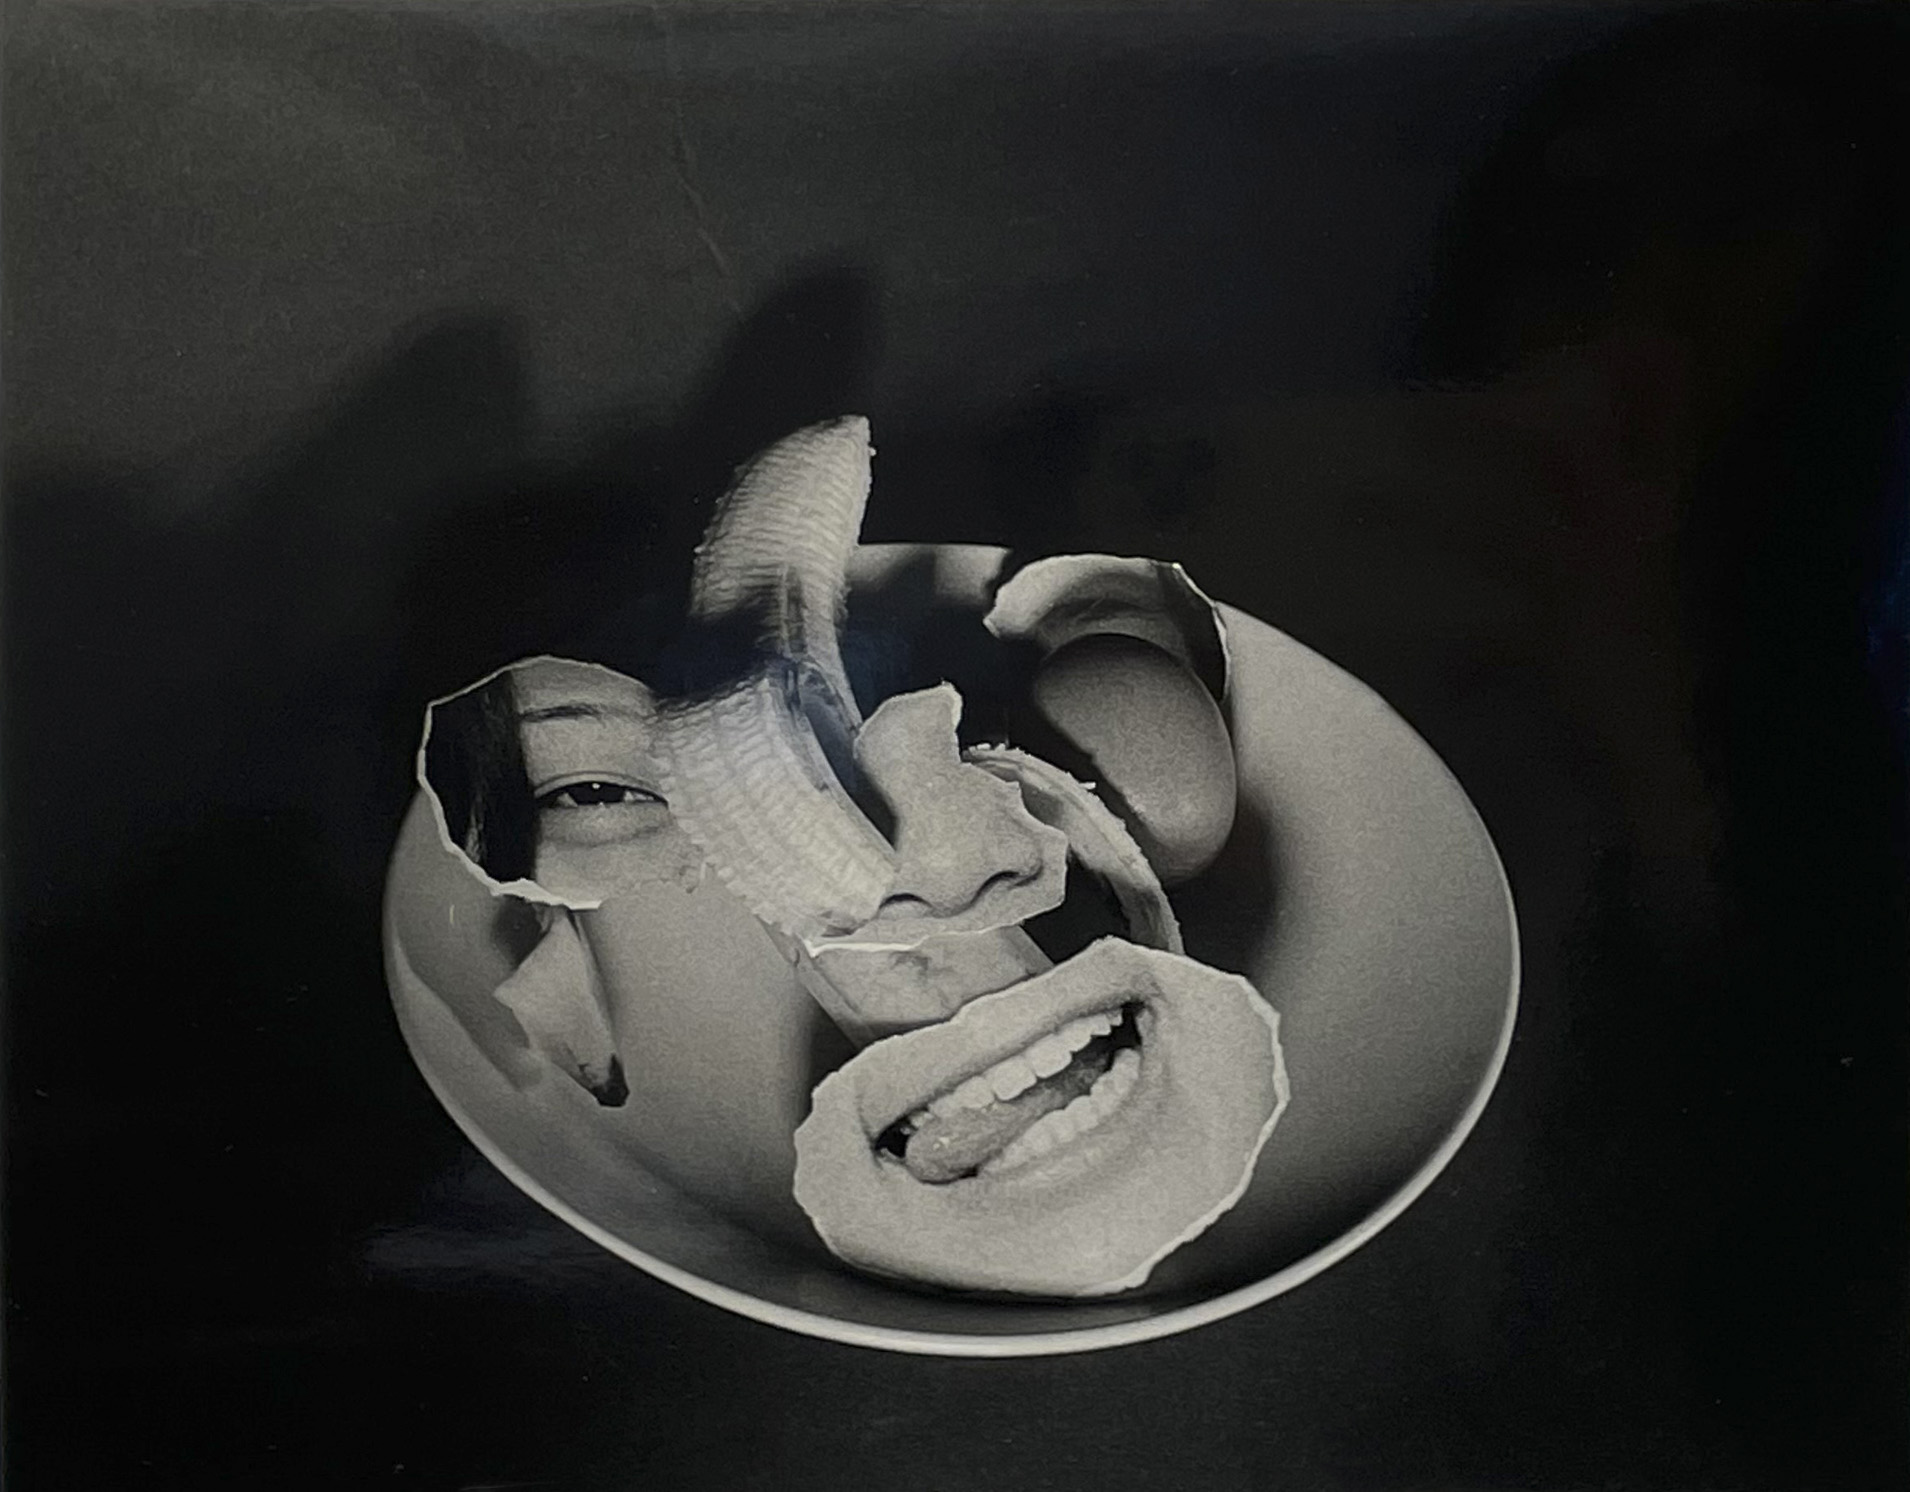 A photographic montage on a plate with a banana appears to show a face